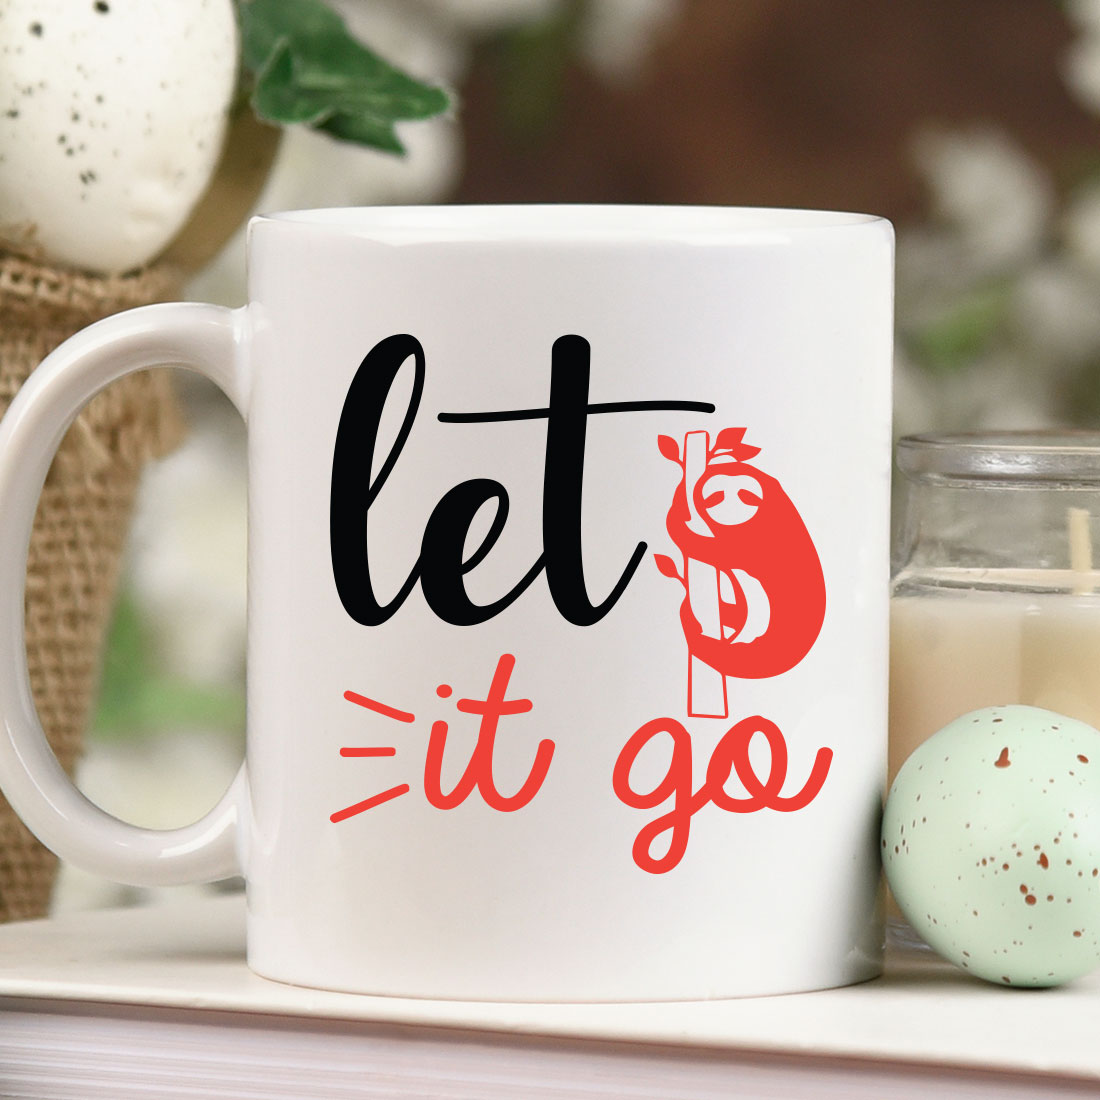 Coffee mug that says let it go next to a candle.